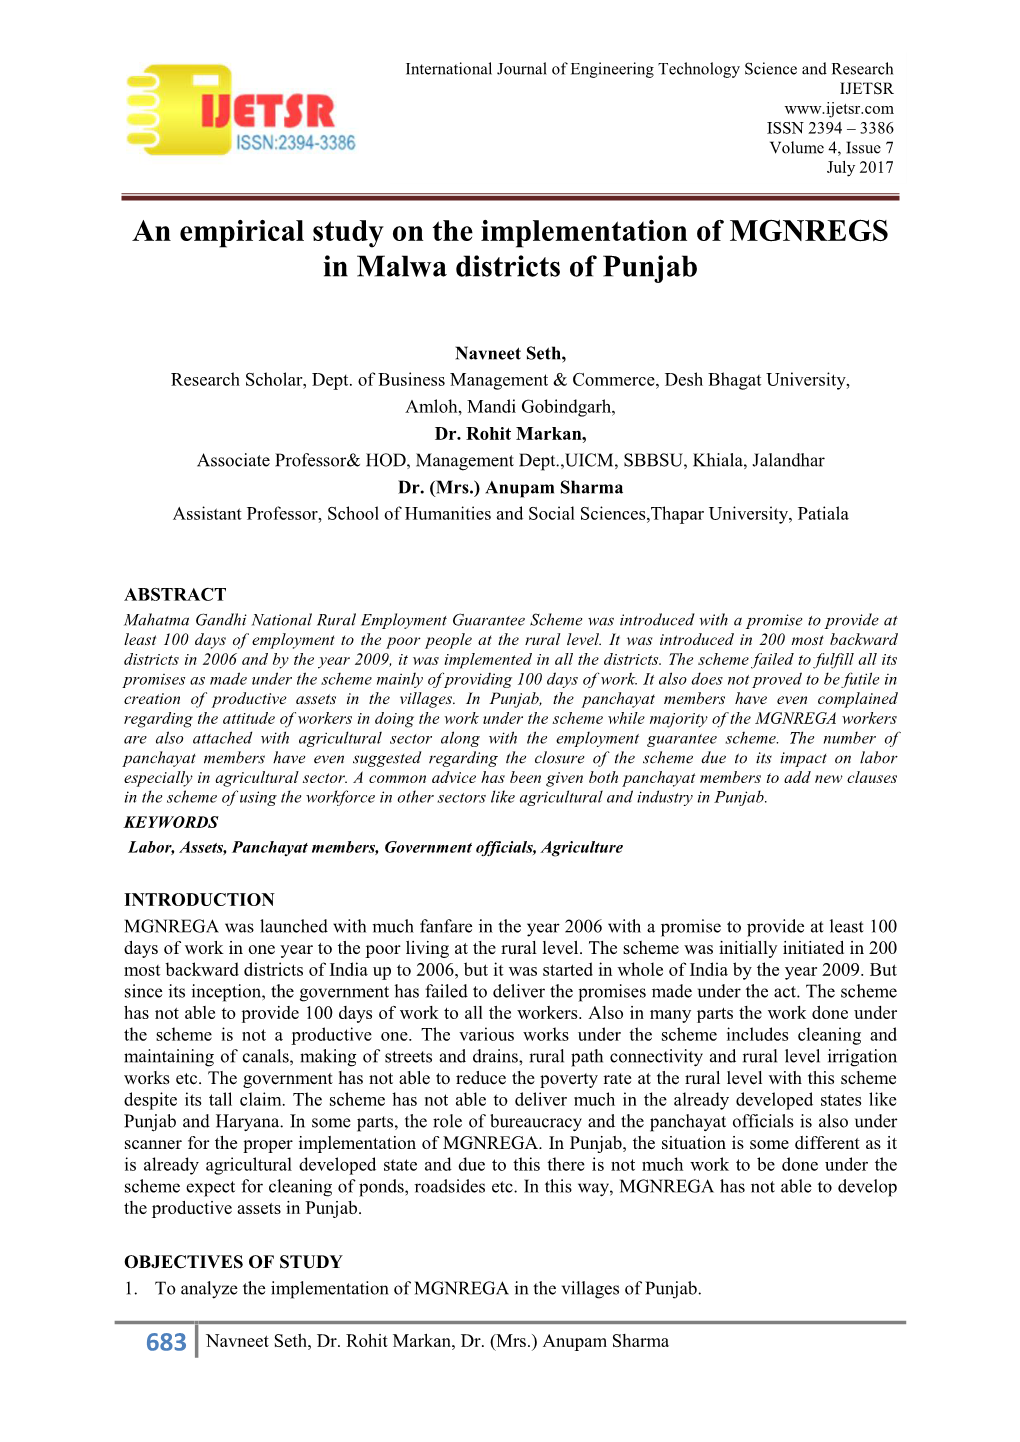 An Empirical Study on the Implementation of MGNREGS in Malwa Districts of Punjab